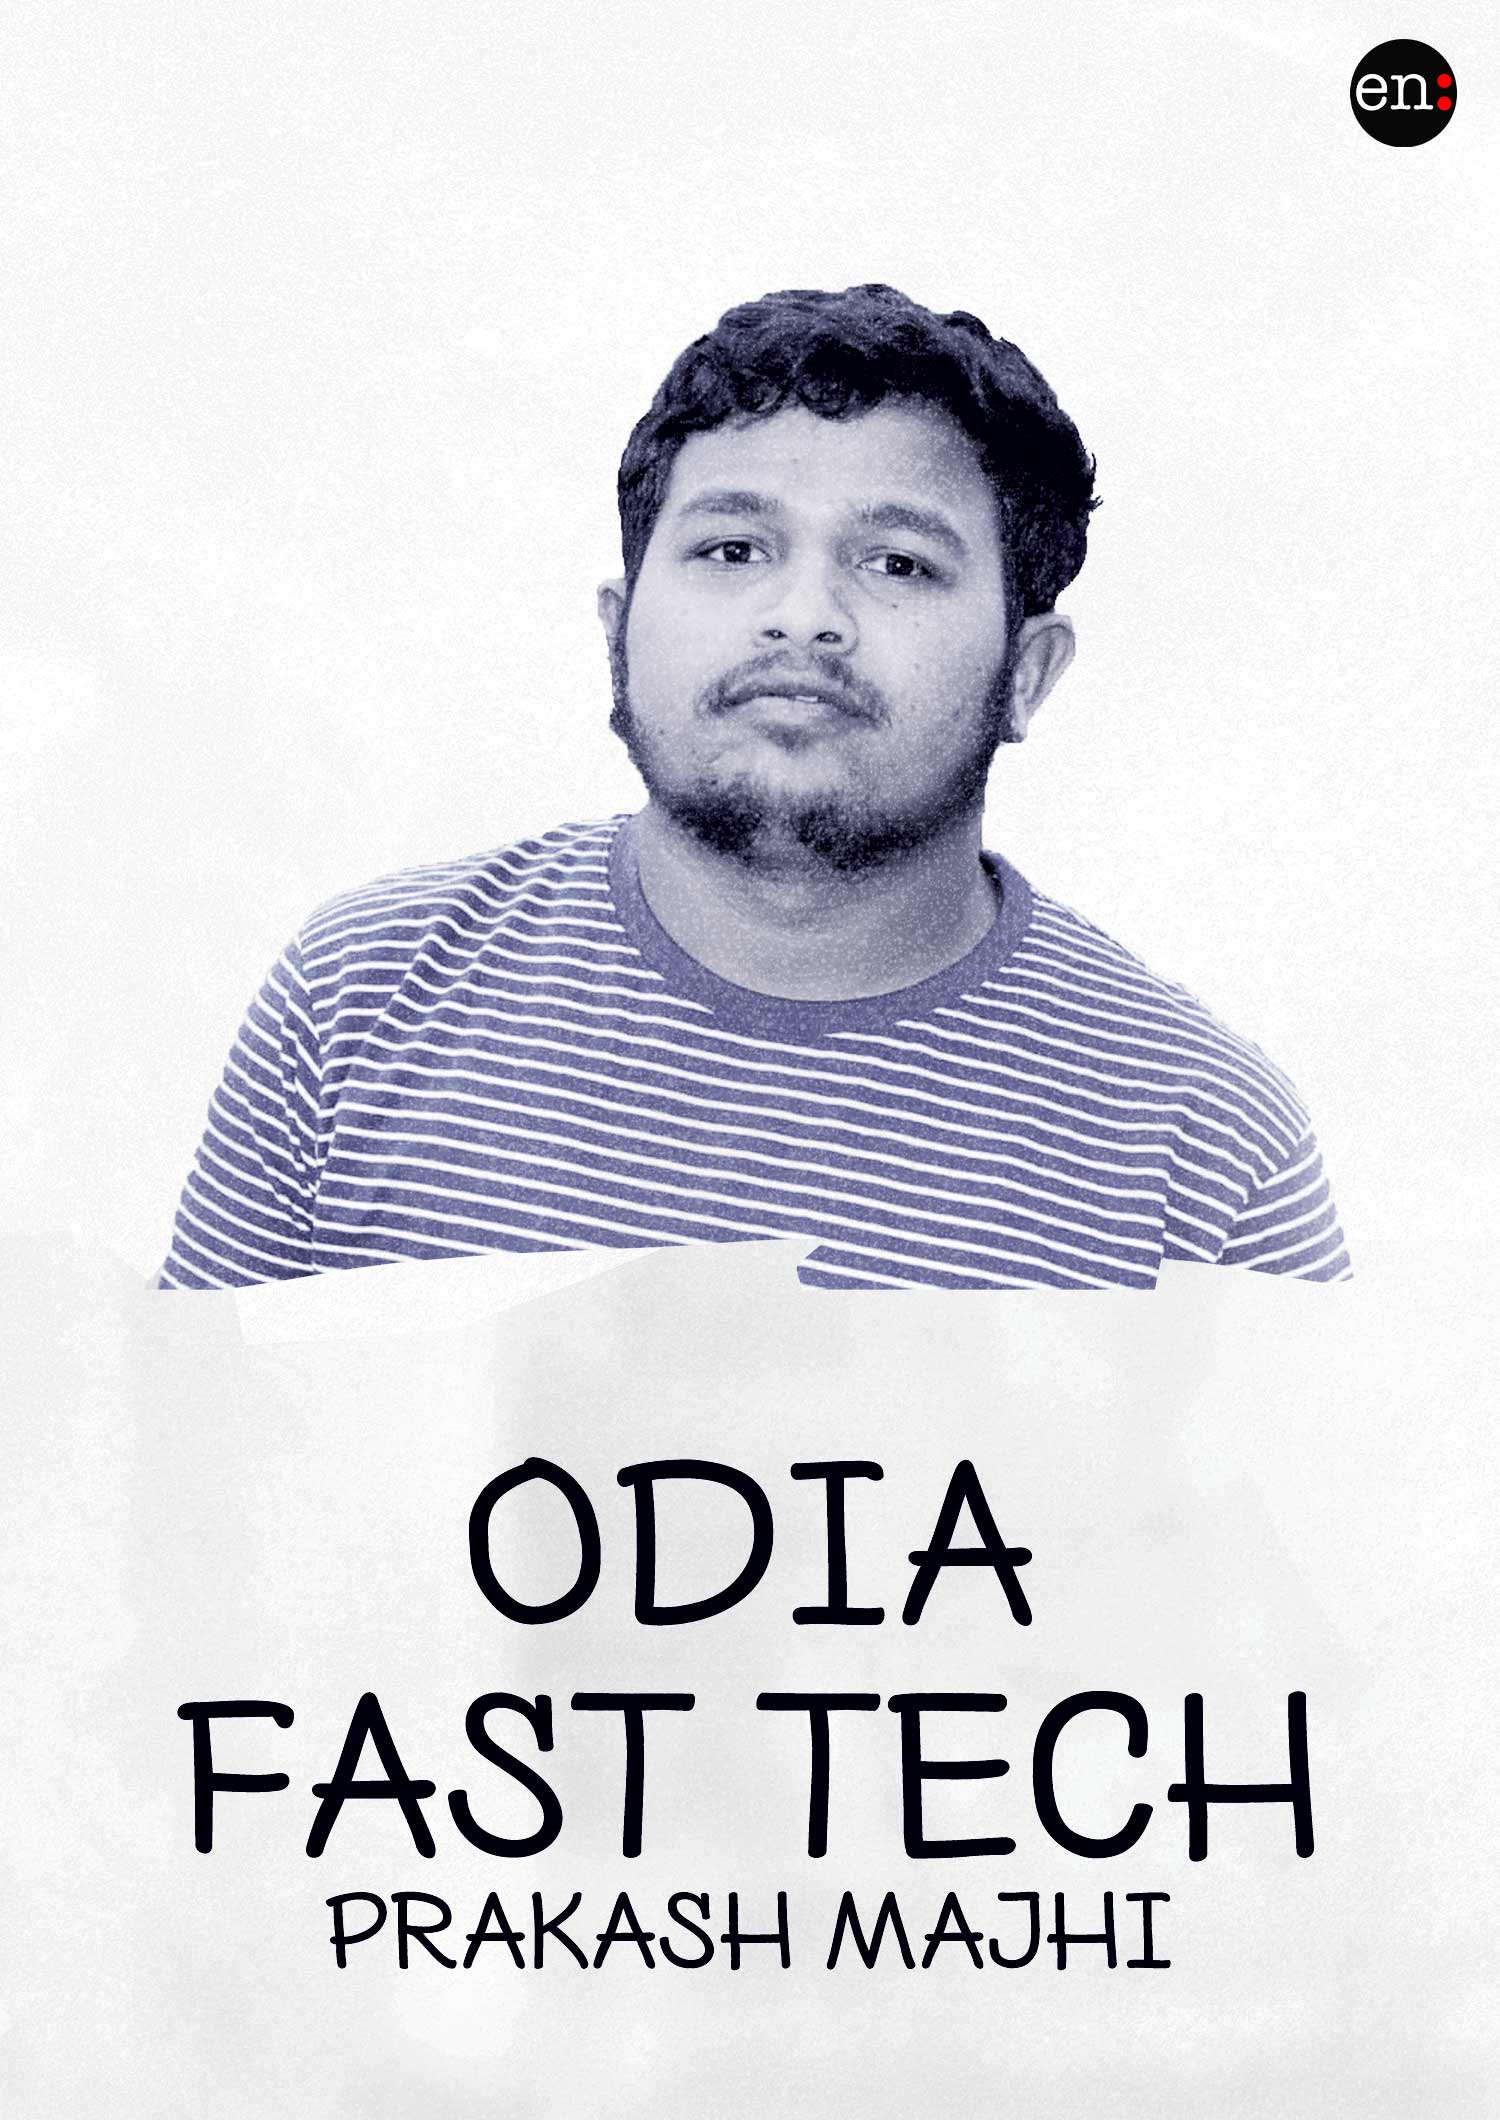 Odia fast Tech - Contact Number, Phone Number, Mobile Number, Whatsapp Number, Email Address and Website